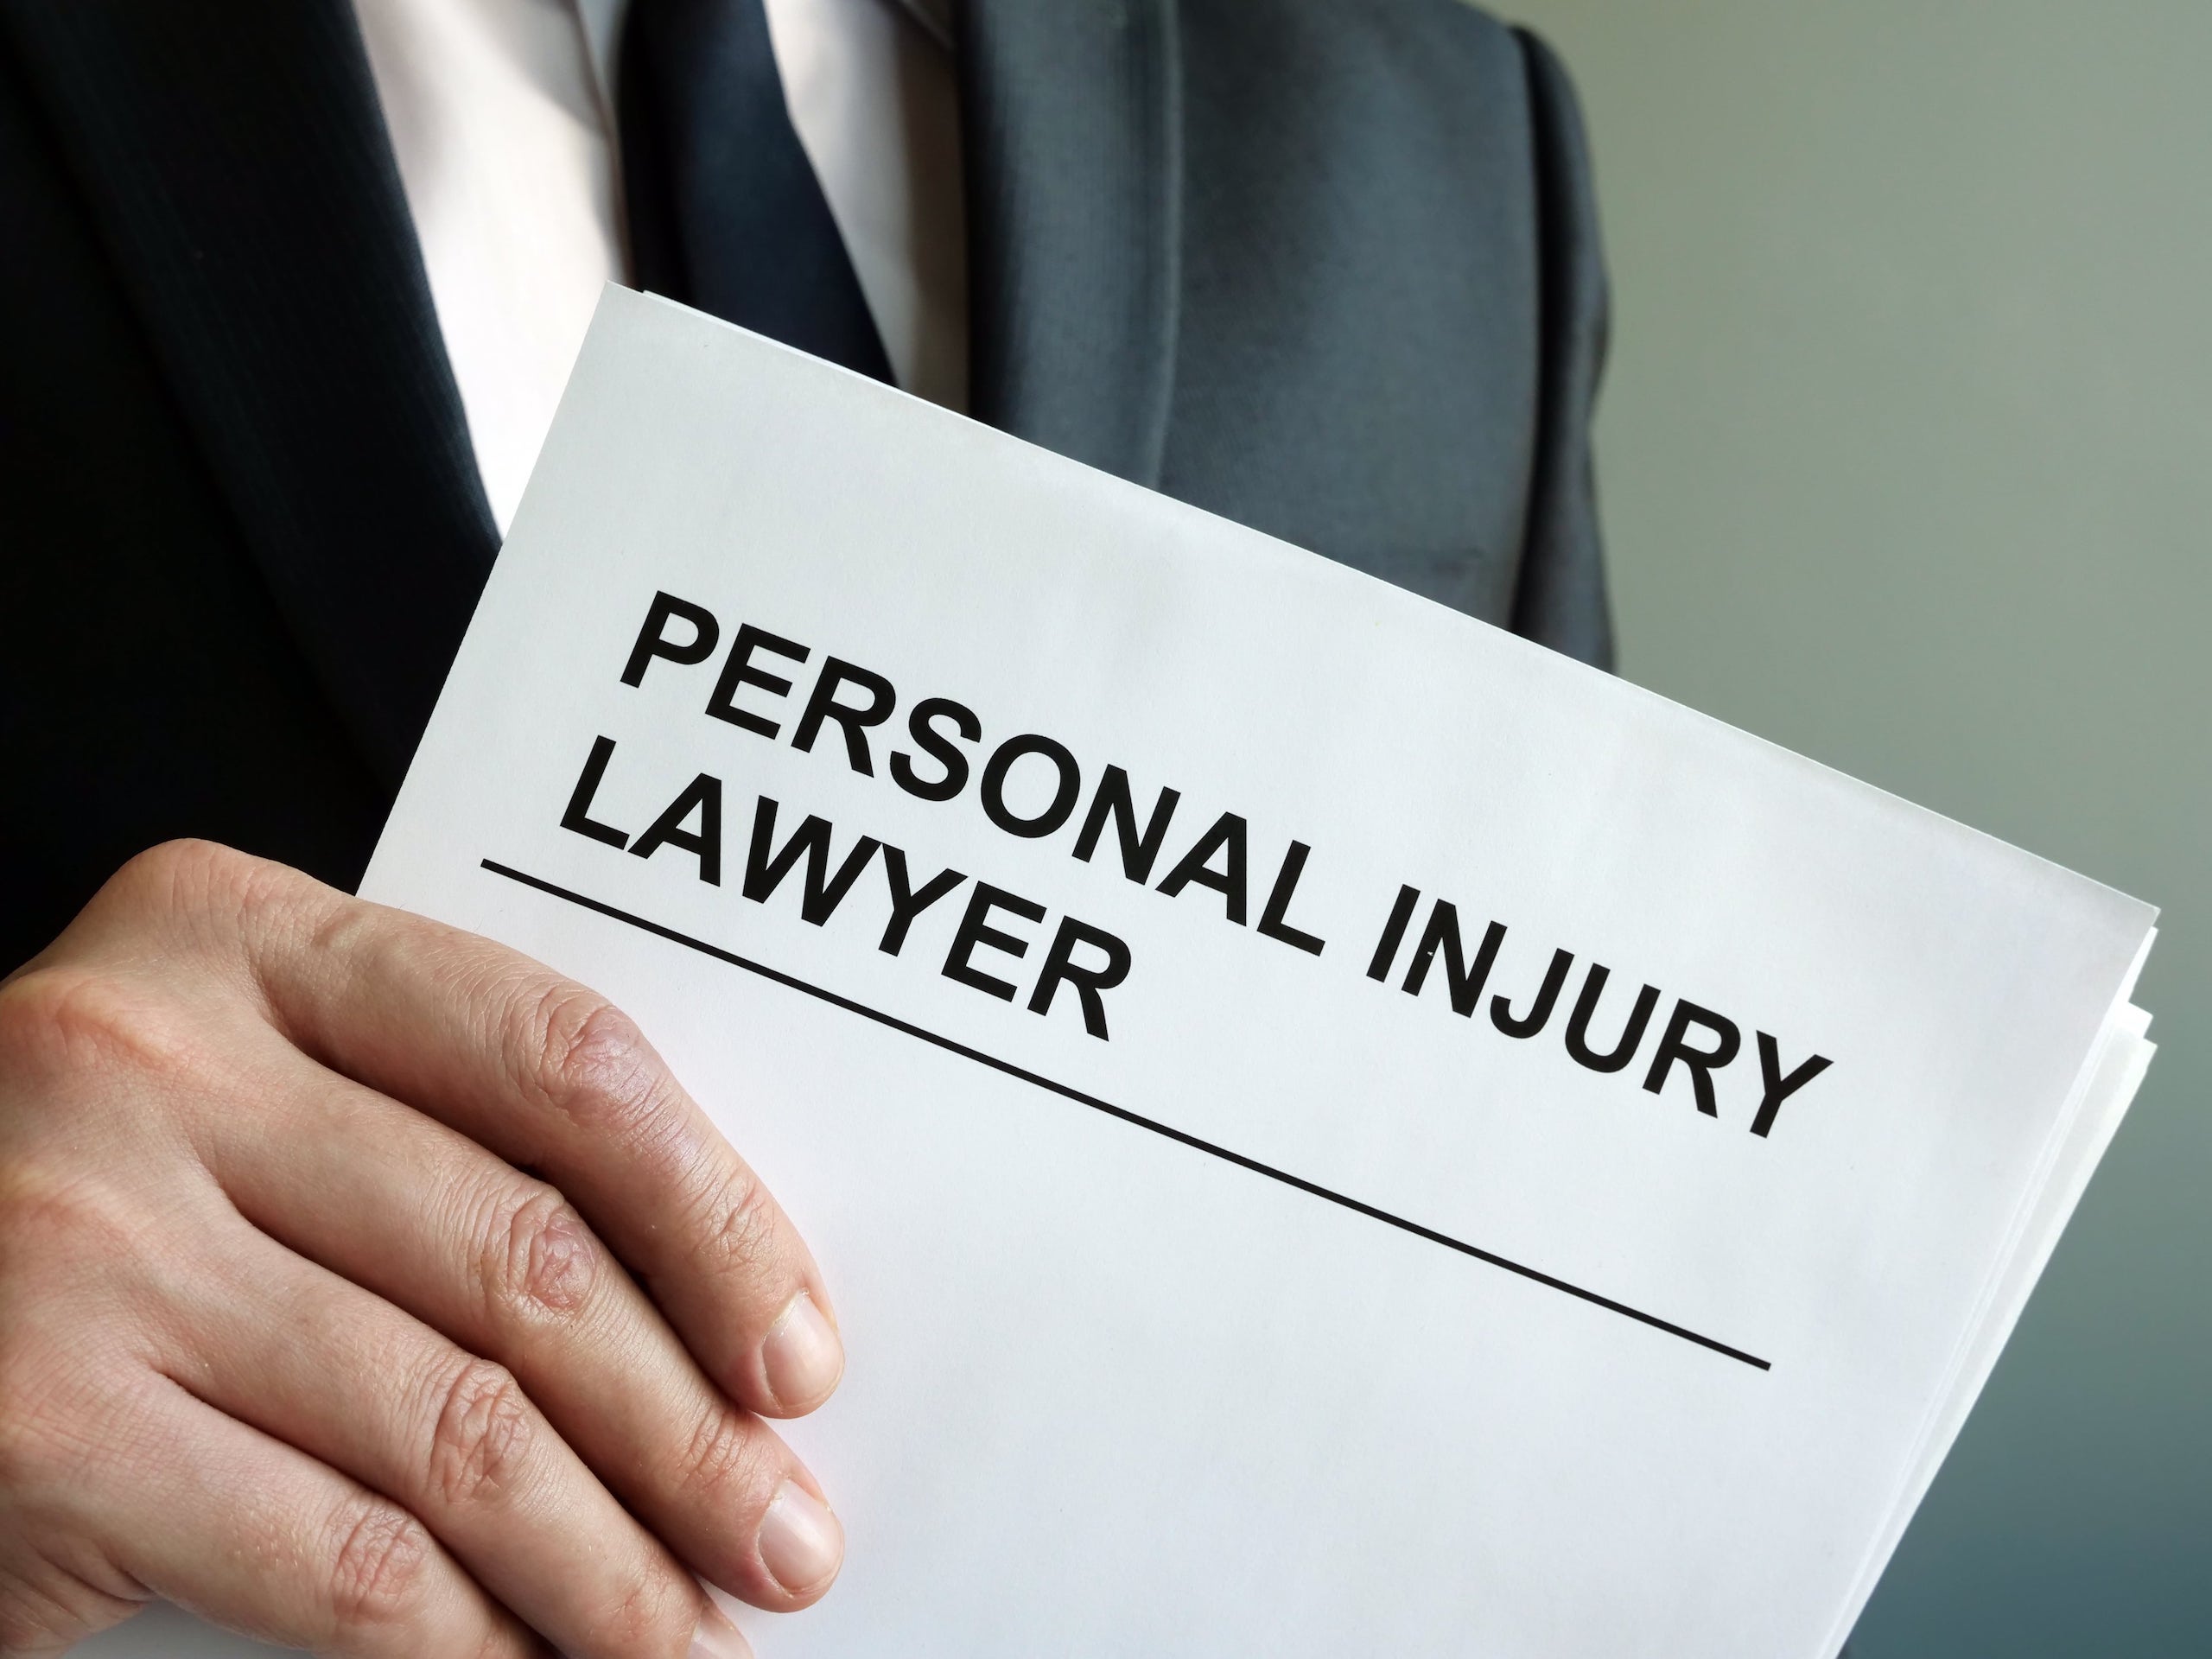 Personal Injury Lawyer Holding Documents with Their Title Visible